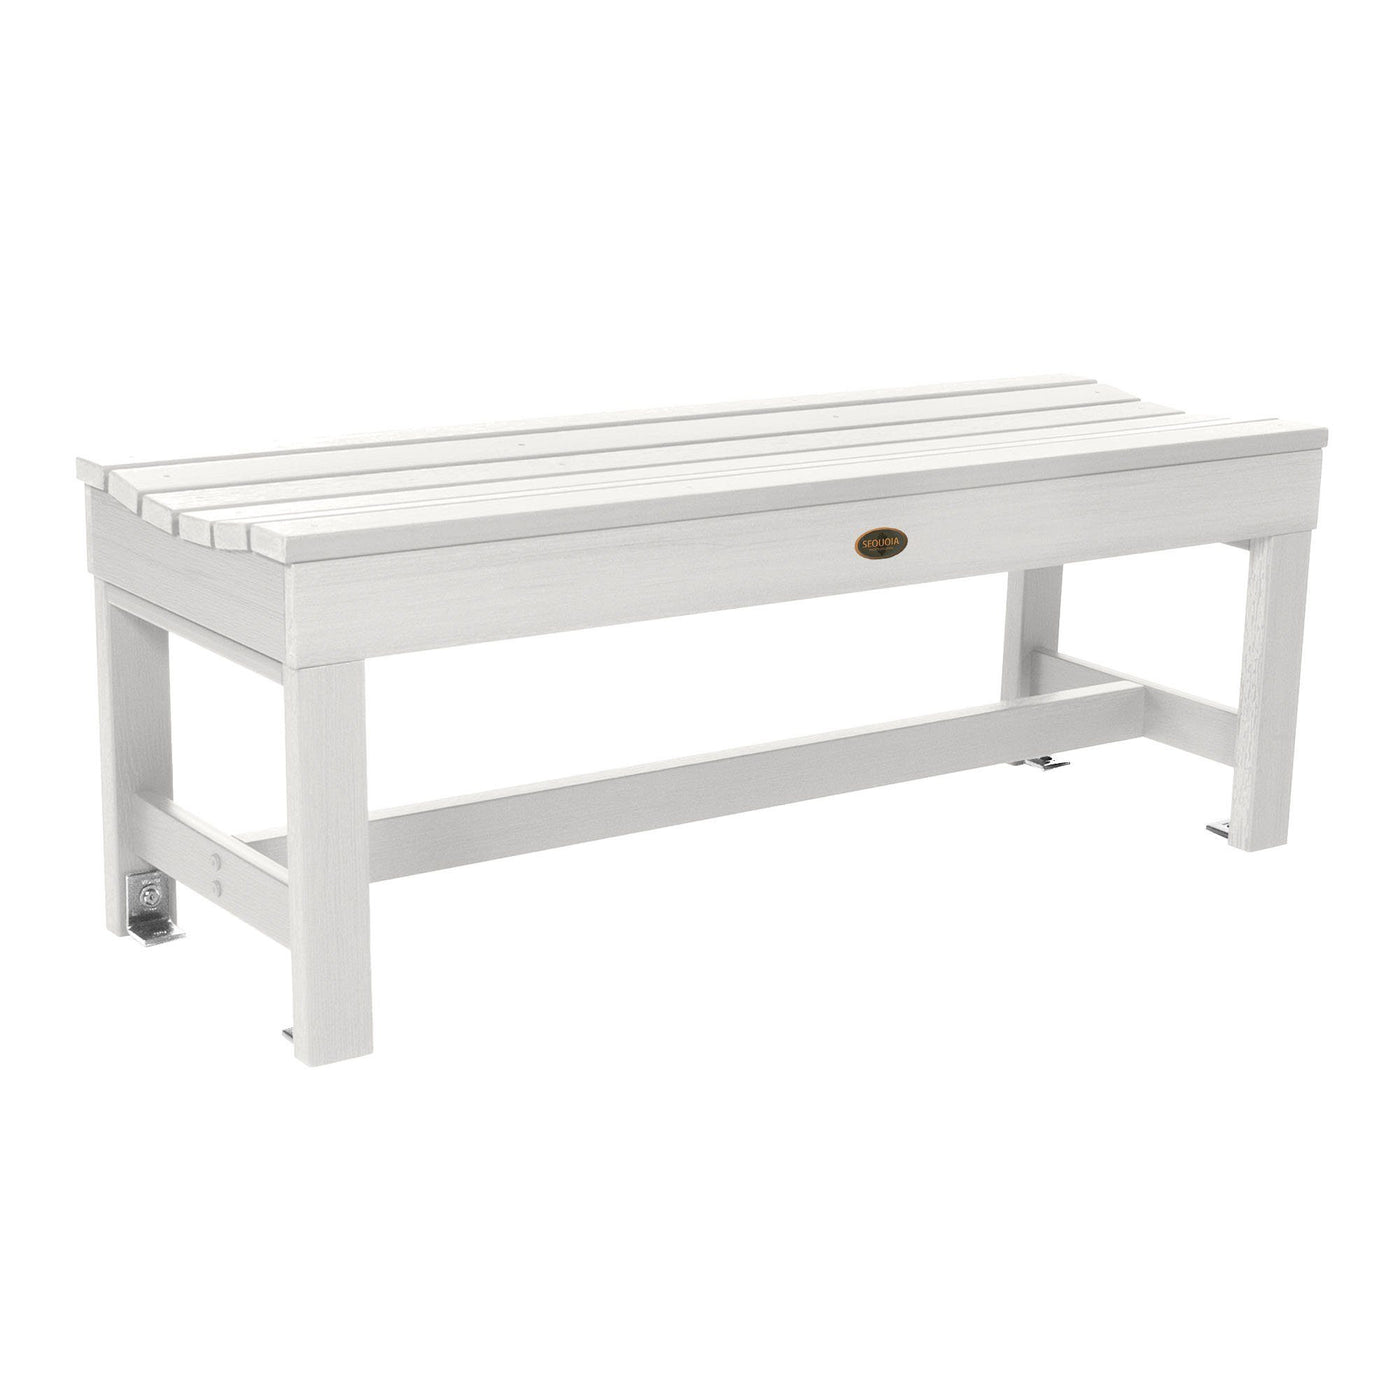 Commercial Grade "Weldon" 4ft Backless Bench Sequoia Professional White 